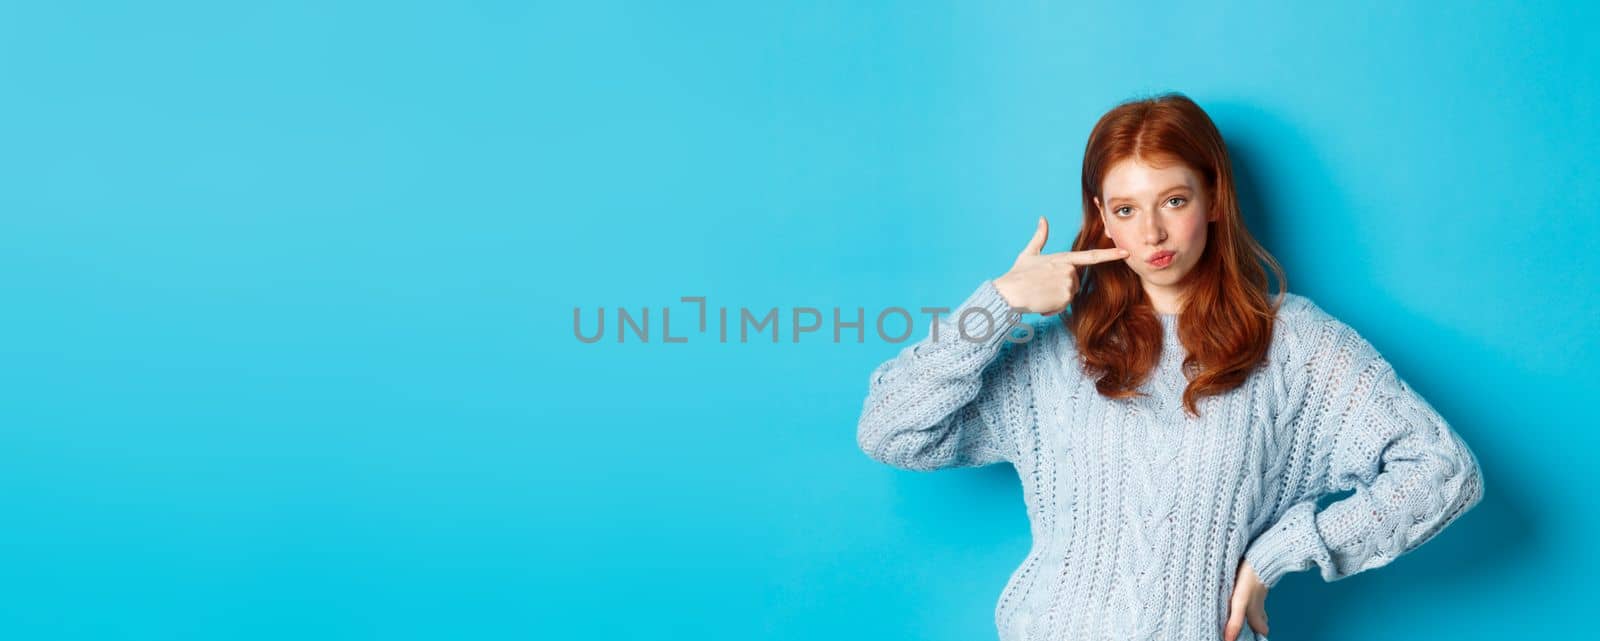 Cute redhead girl in sweater poking her cheek, staring at camera sassy, standing over blue background.